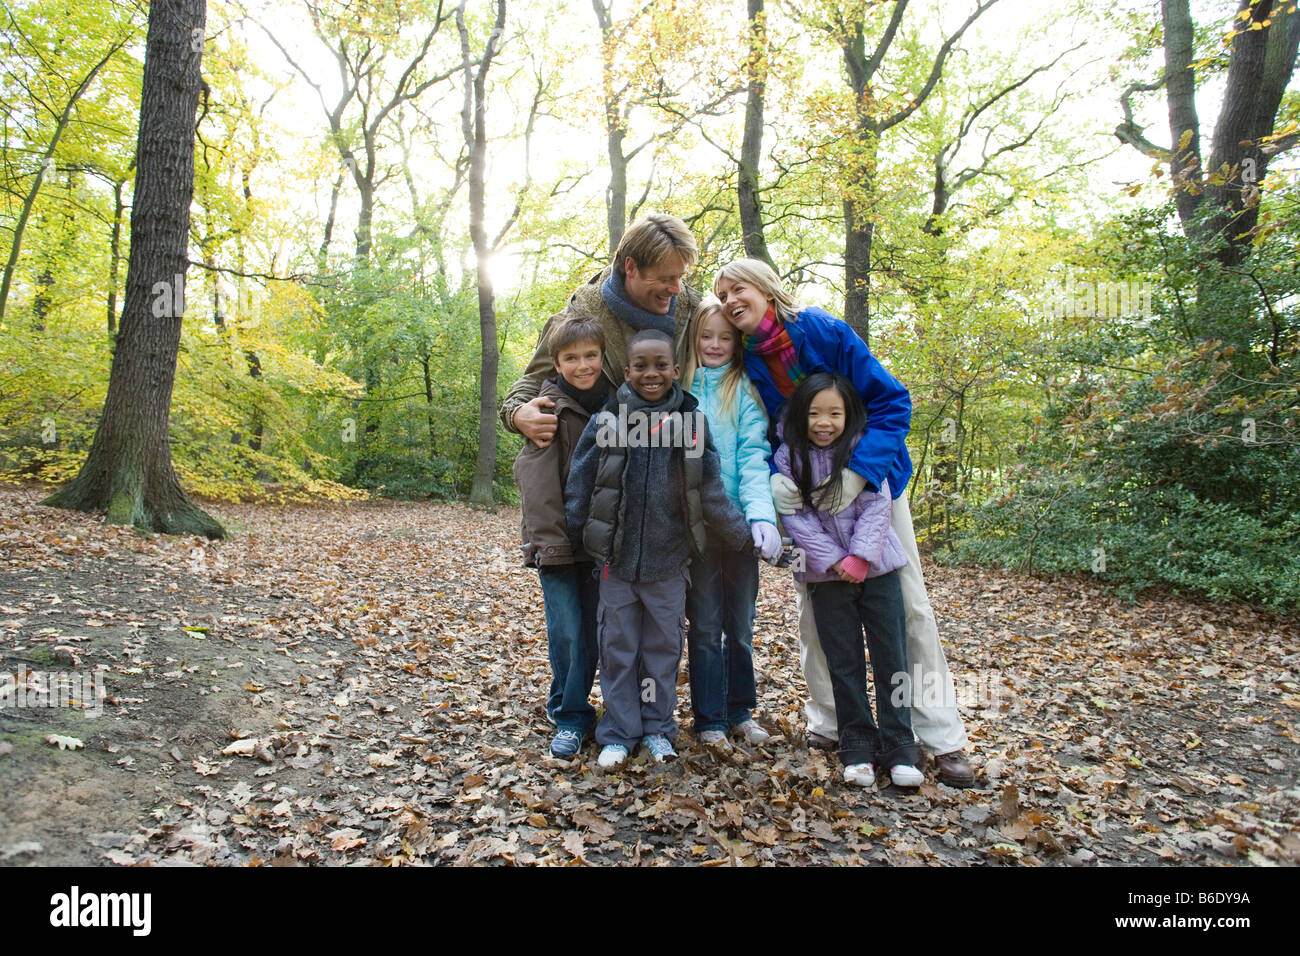 Parents and children in a wood in autumn. Stock Photo